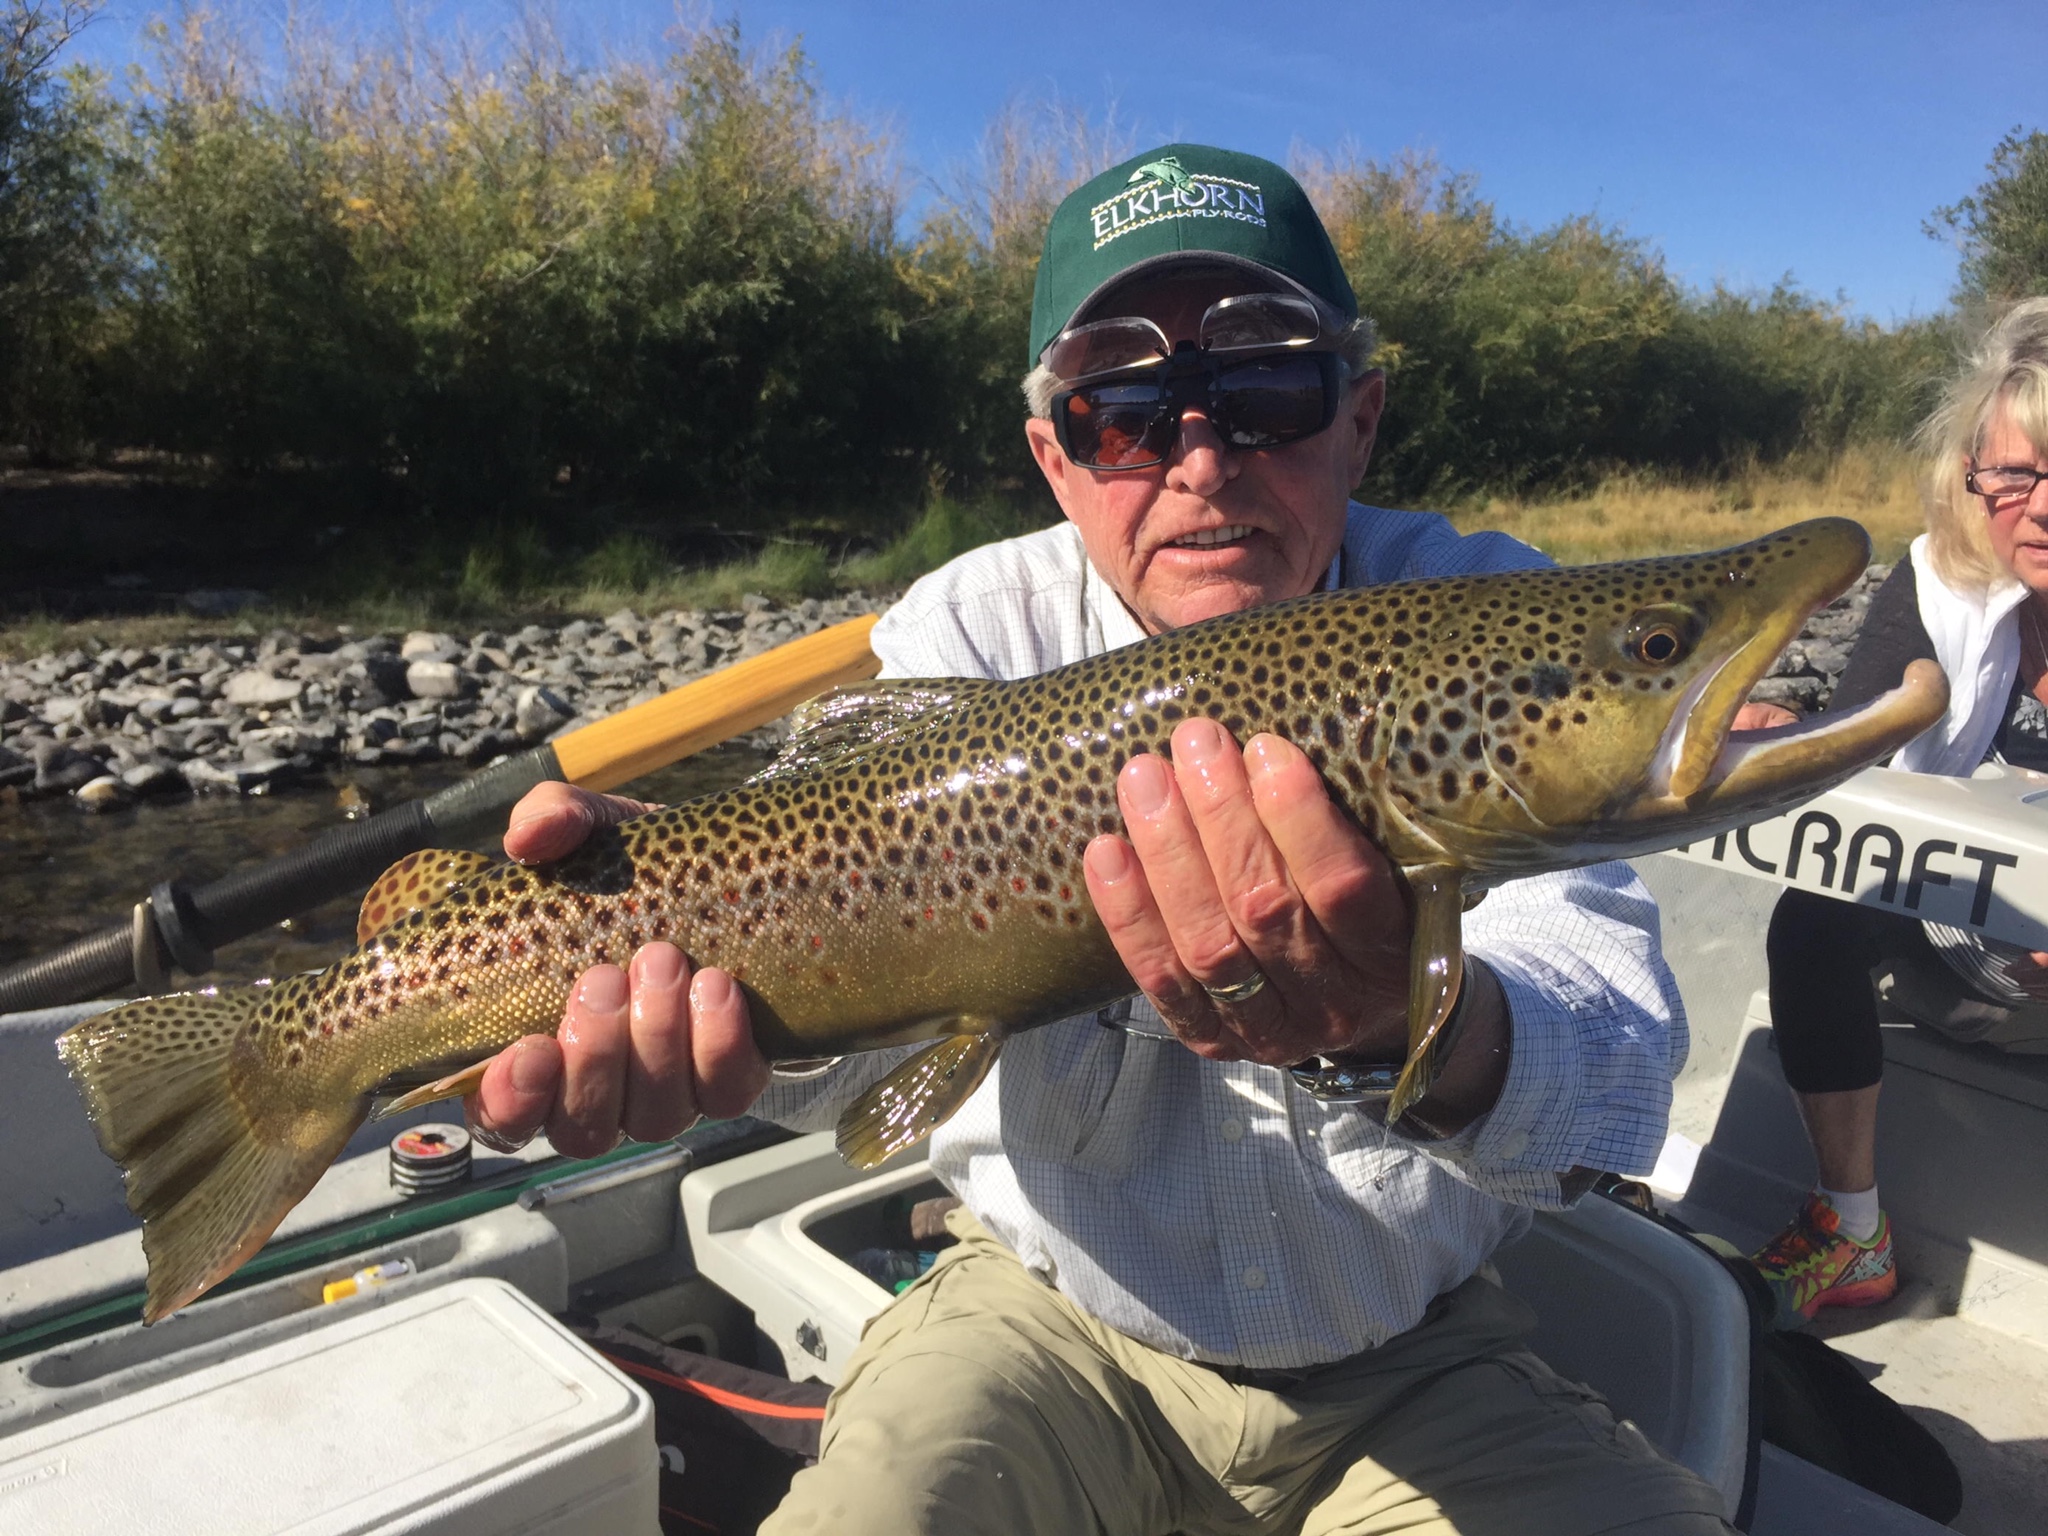 Montana Fly Fishing Guides Todd Scott - Montana Fly Fishing Guides